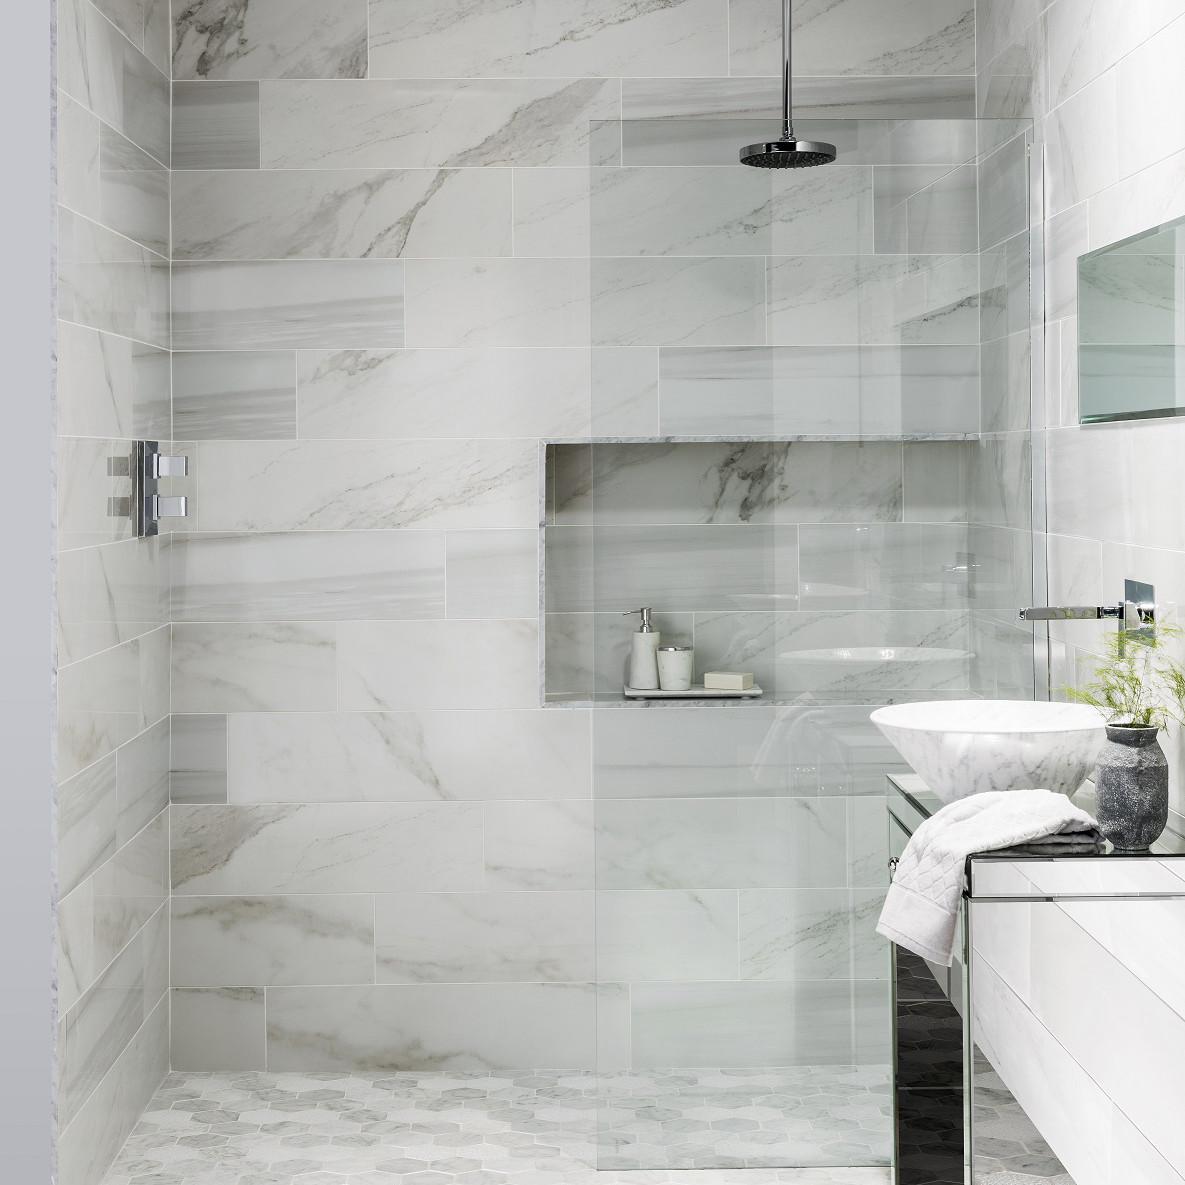 Marble Bathroom Tile
 These faux marble tiles have got everyone talking